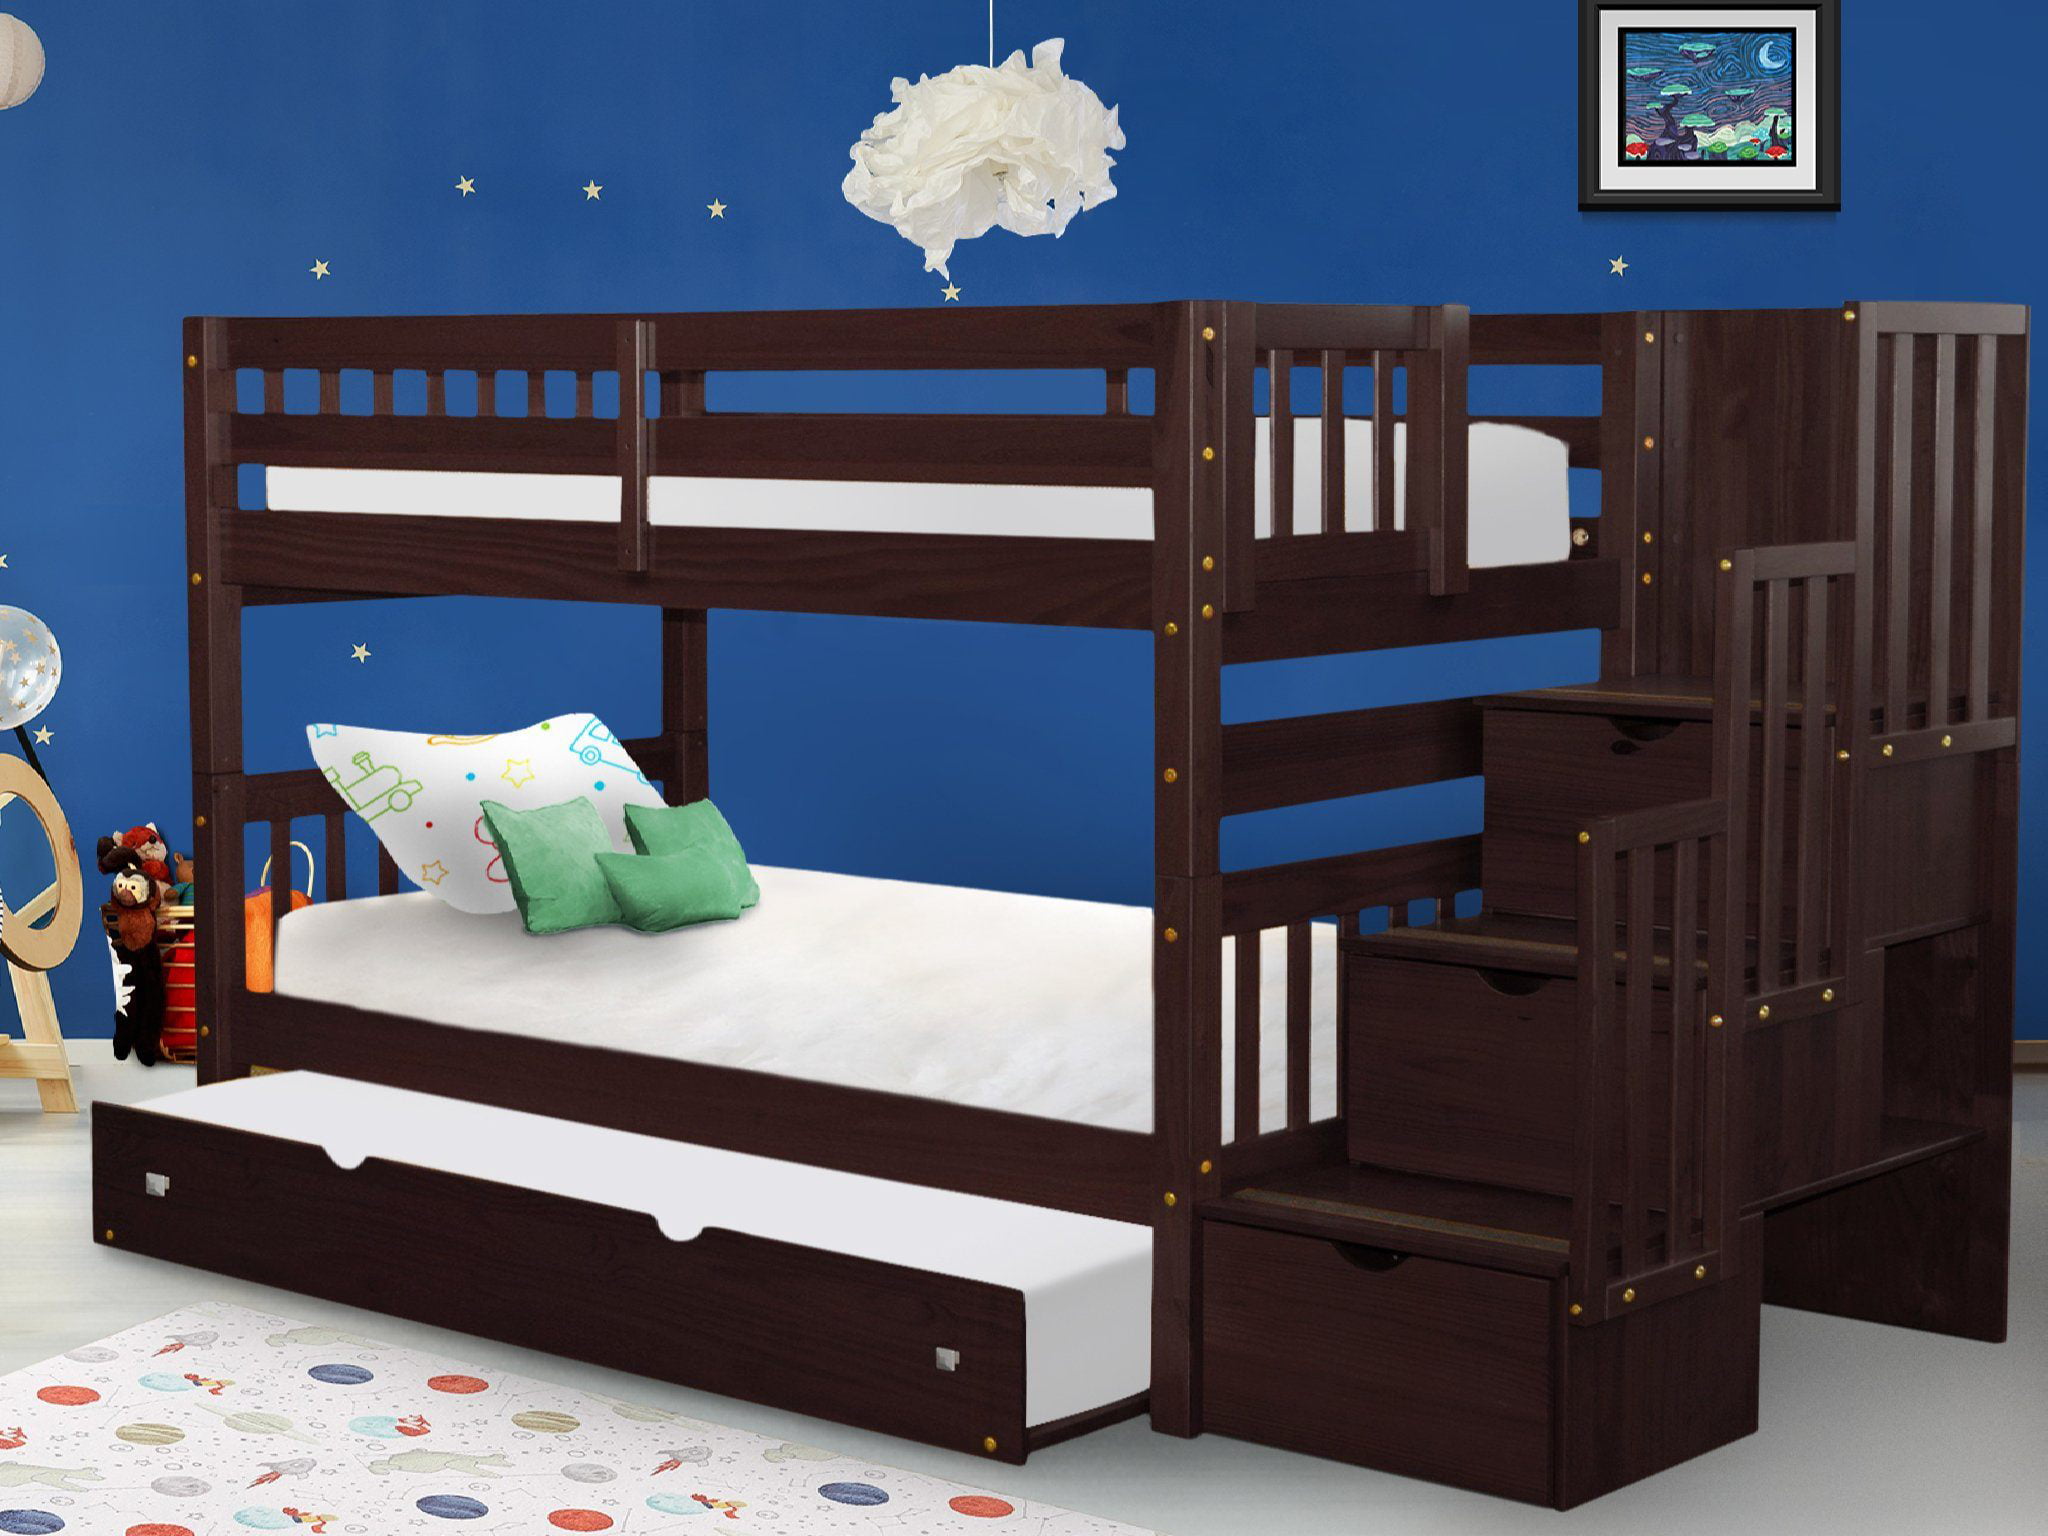 Bedz King Stairway Bunk Beds Twin Over, Bunk Bed Over King Bed